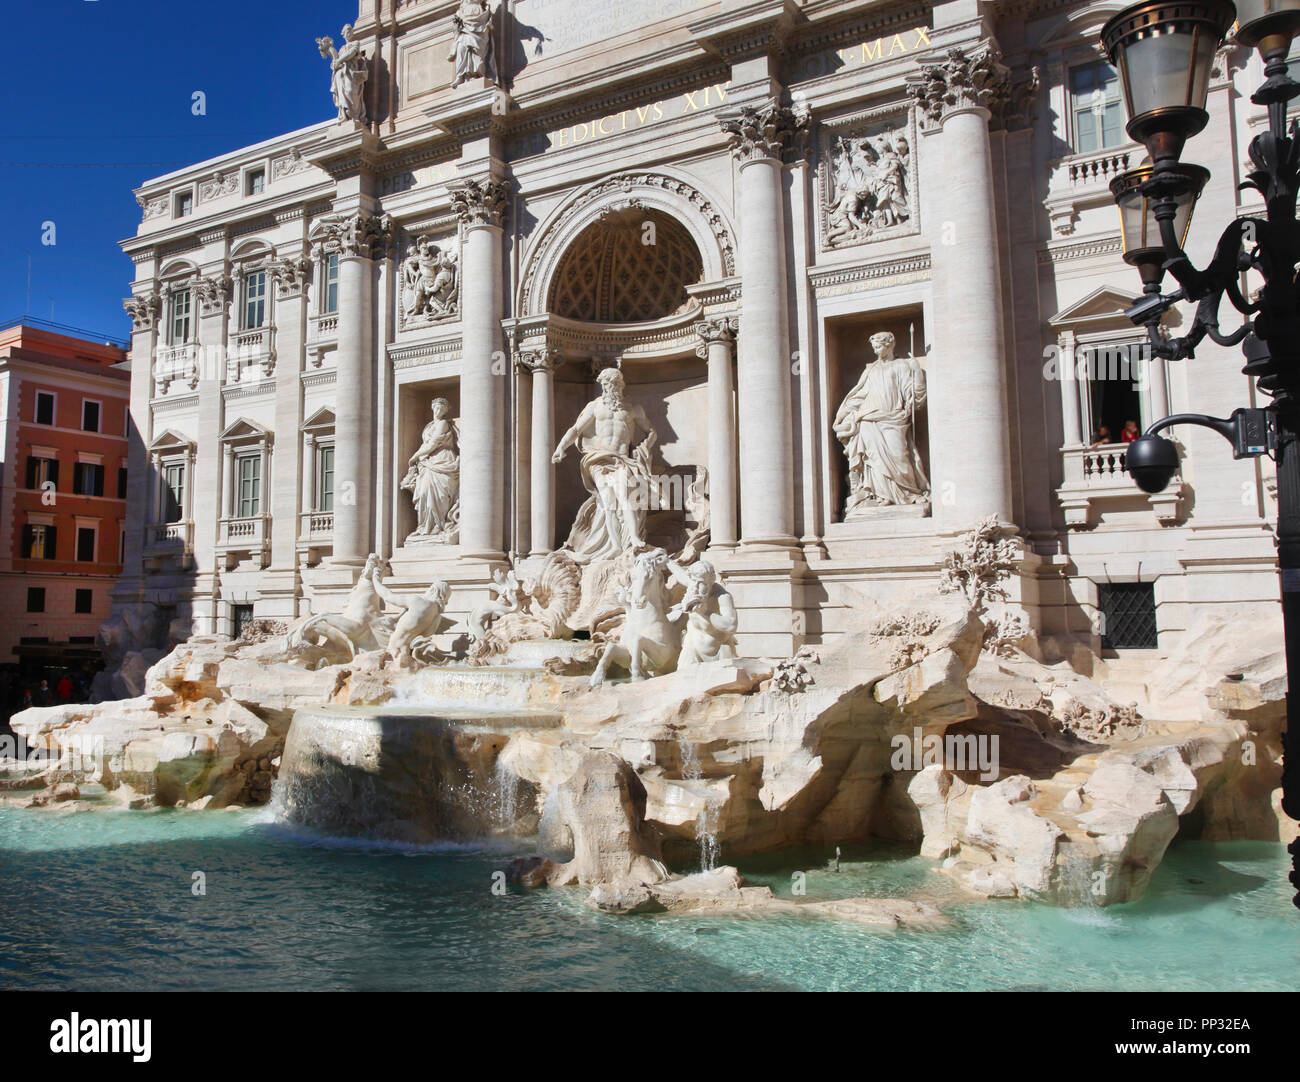 Image of the Trevi Fountain depicting the Taming of the Waters in the Piazza di Trevi, Rome, Italy.The backdrop for the fountain is the Palazzo Poli.  Stock Photo